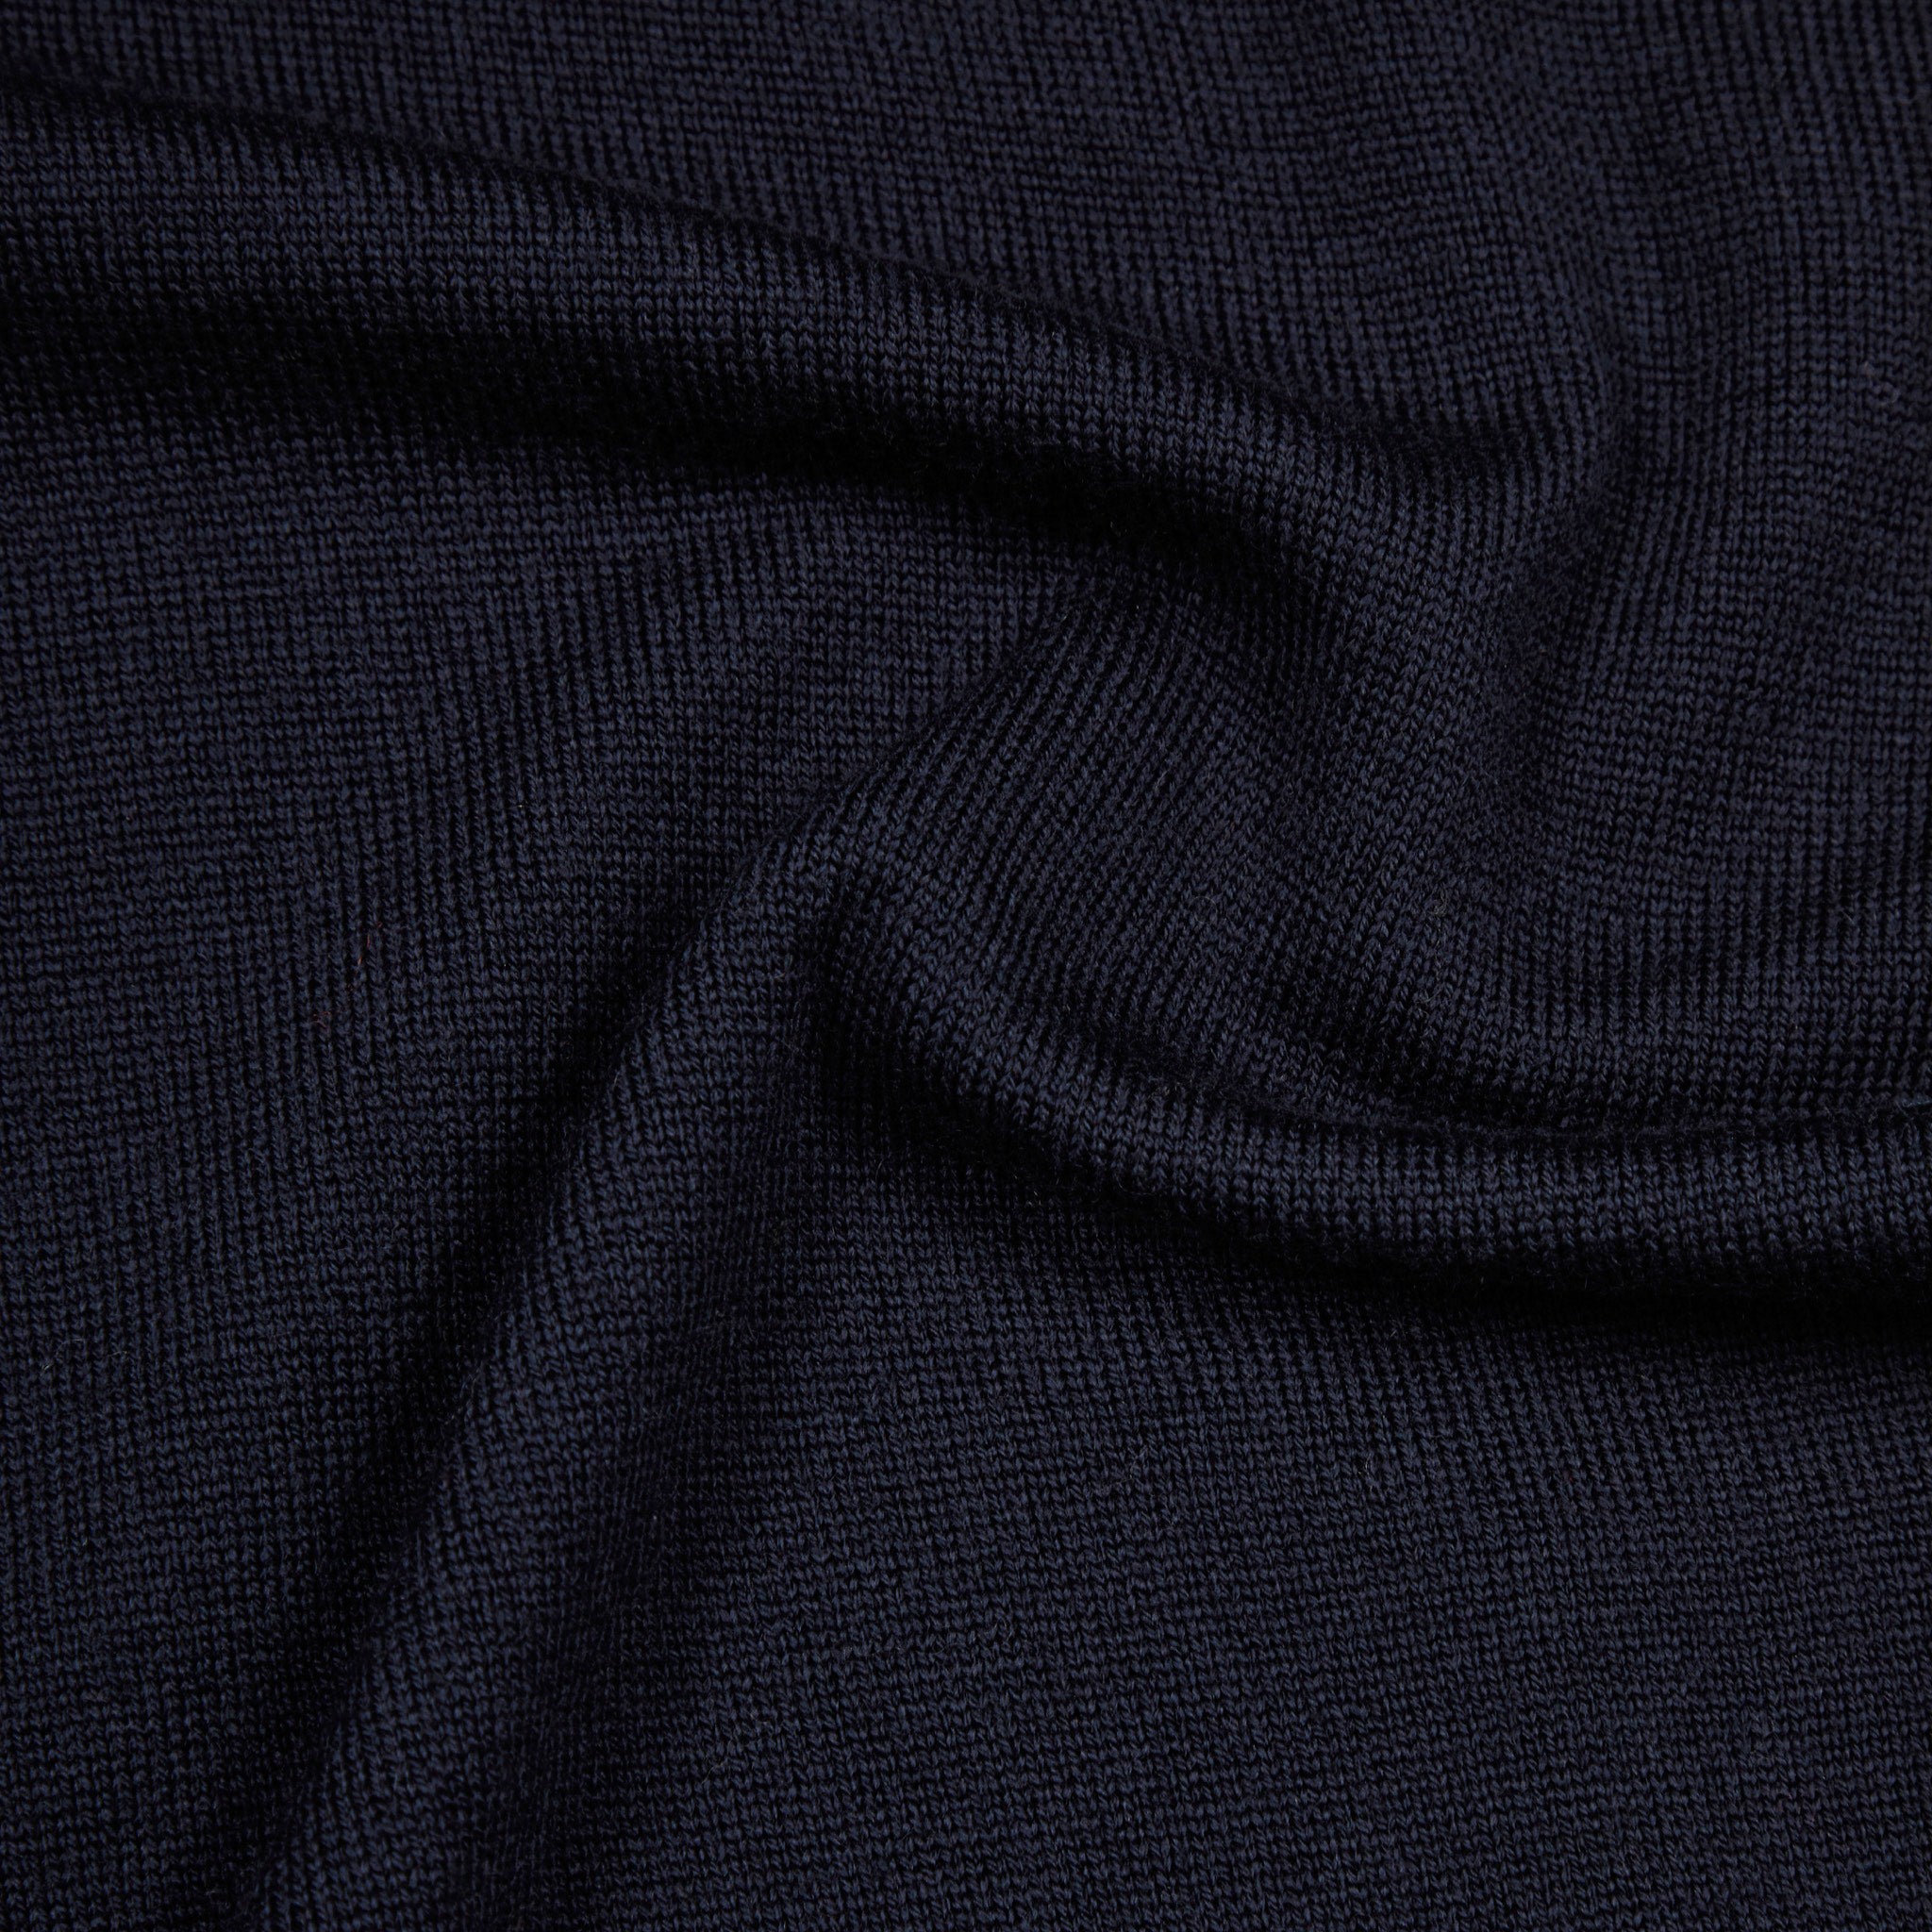 Merino father's polo shirt in navy